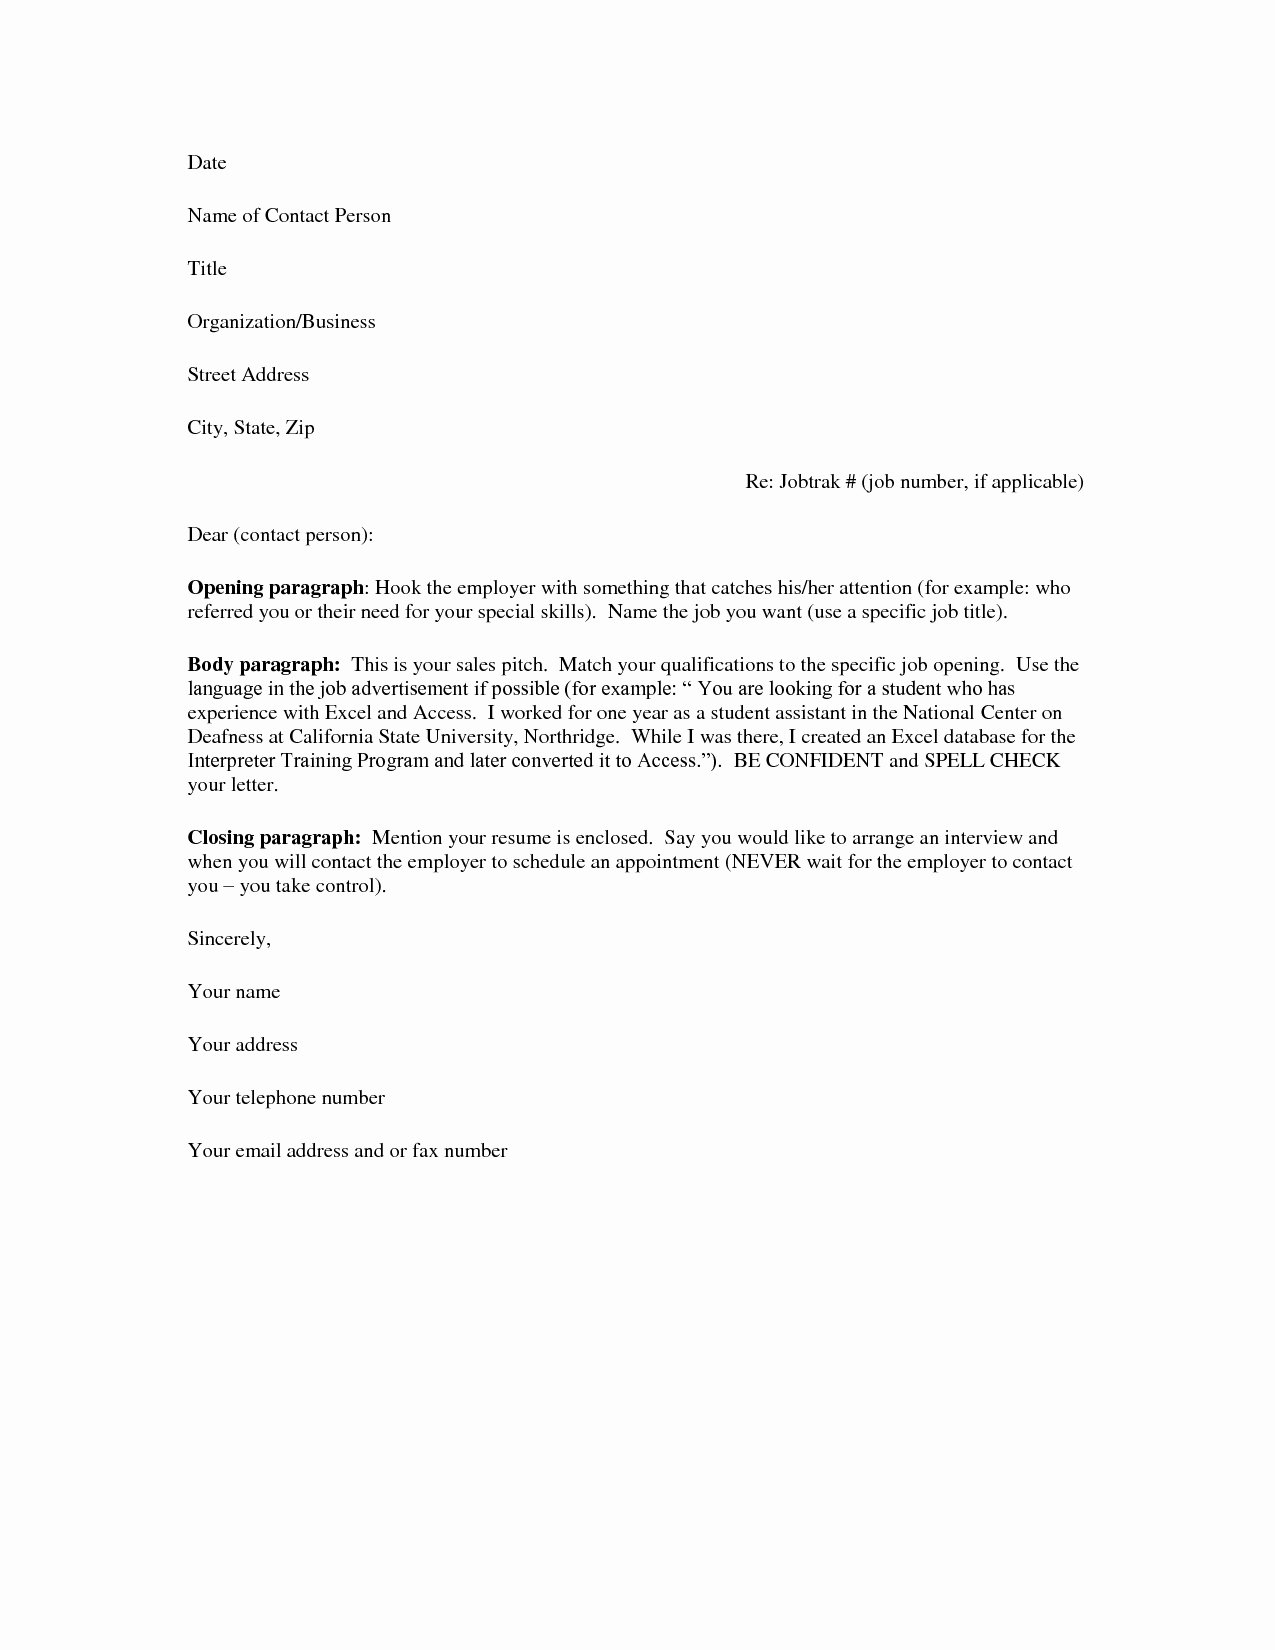 Resume Cover Letter Template 2017